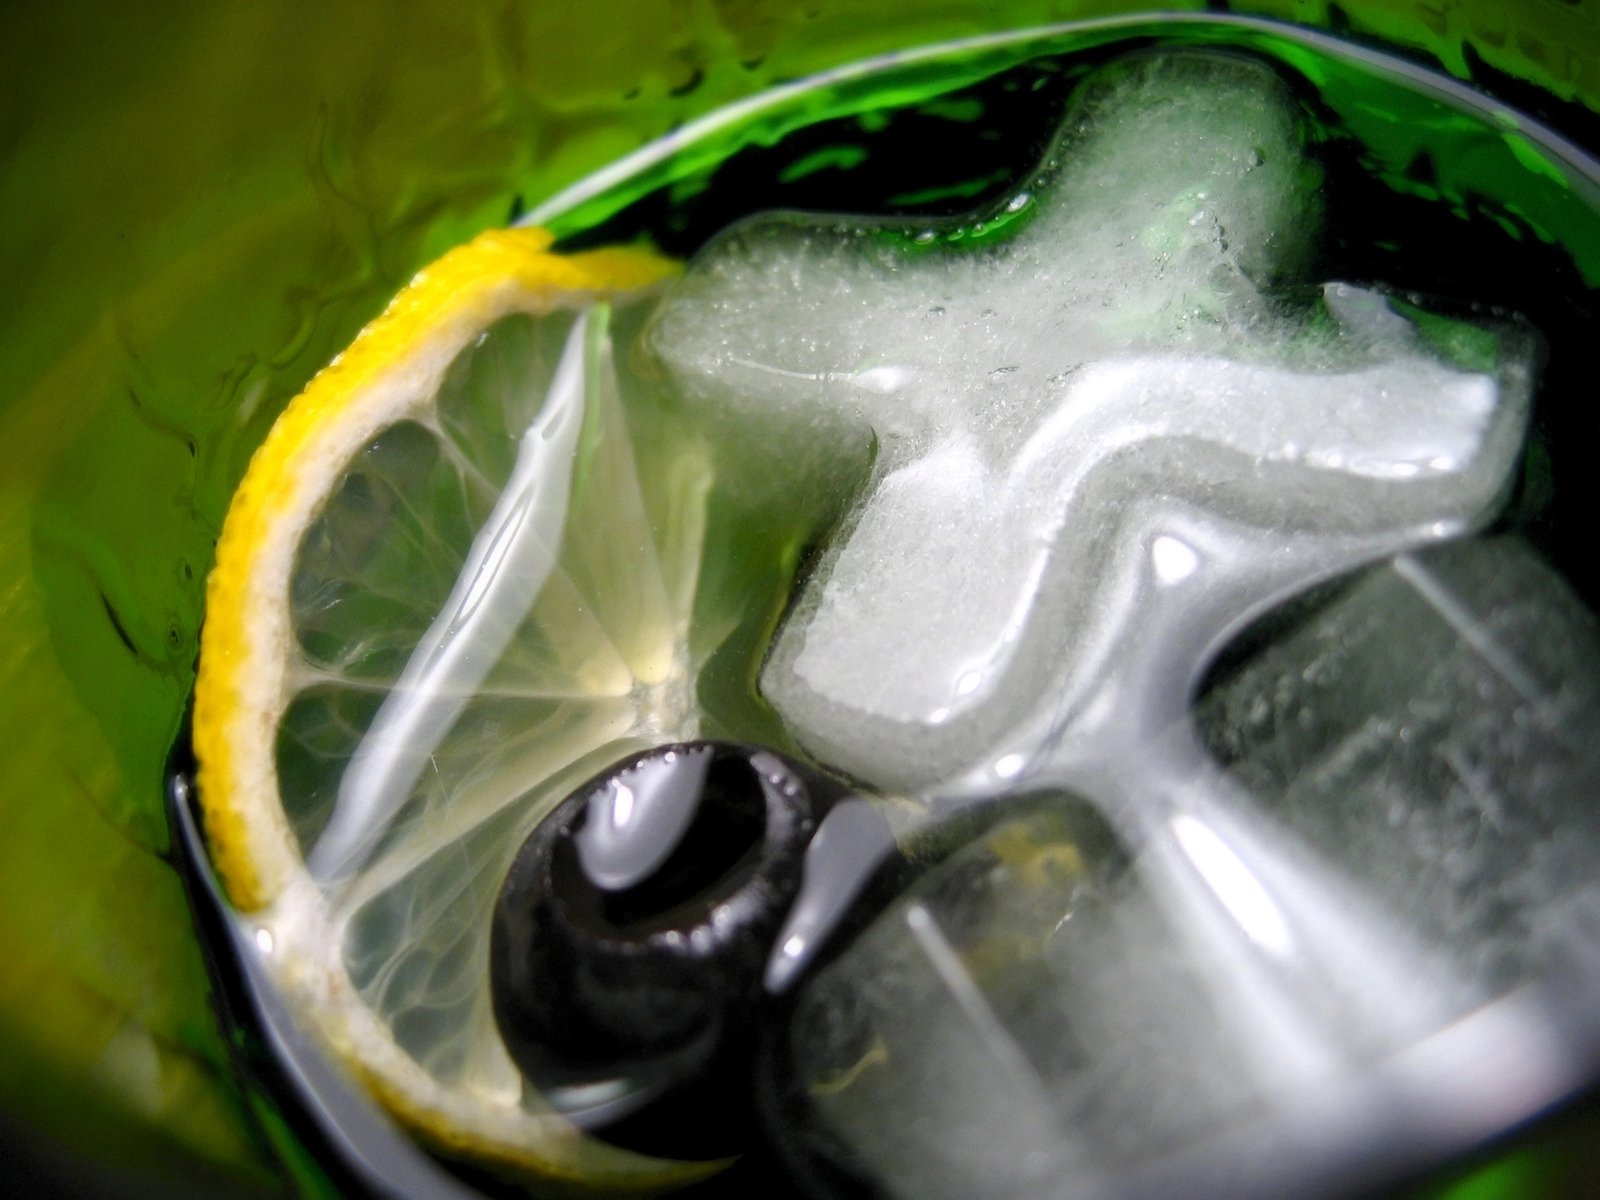 an empty green juicer with limes, ice and water